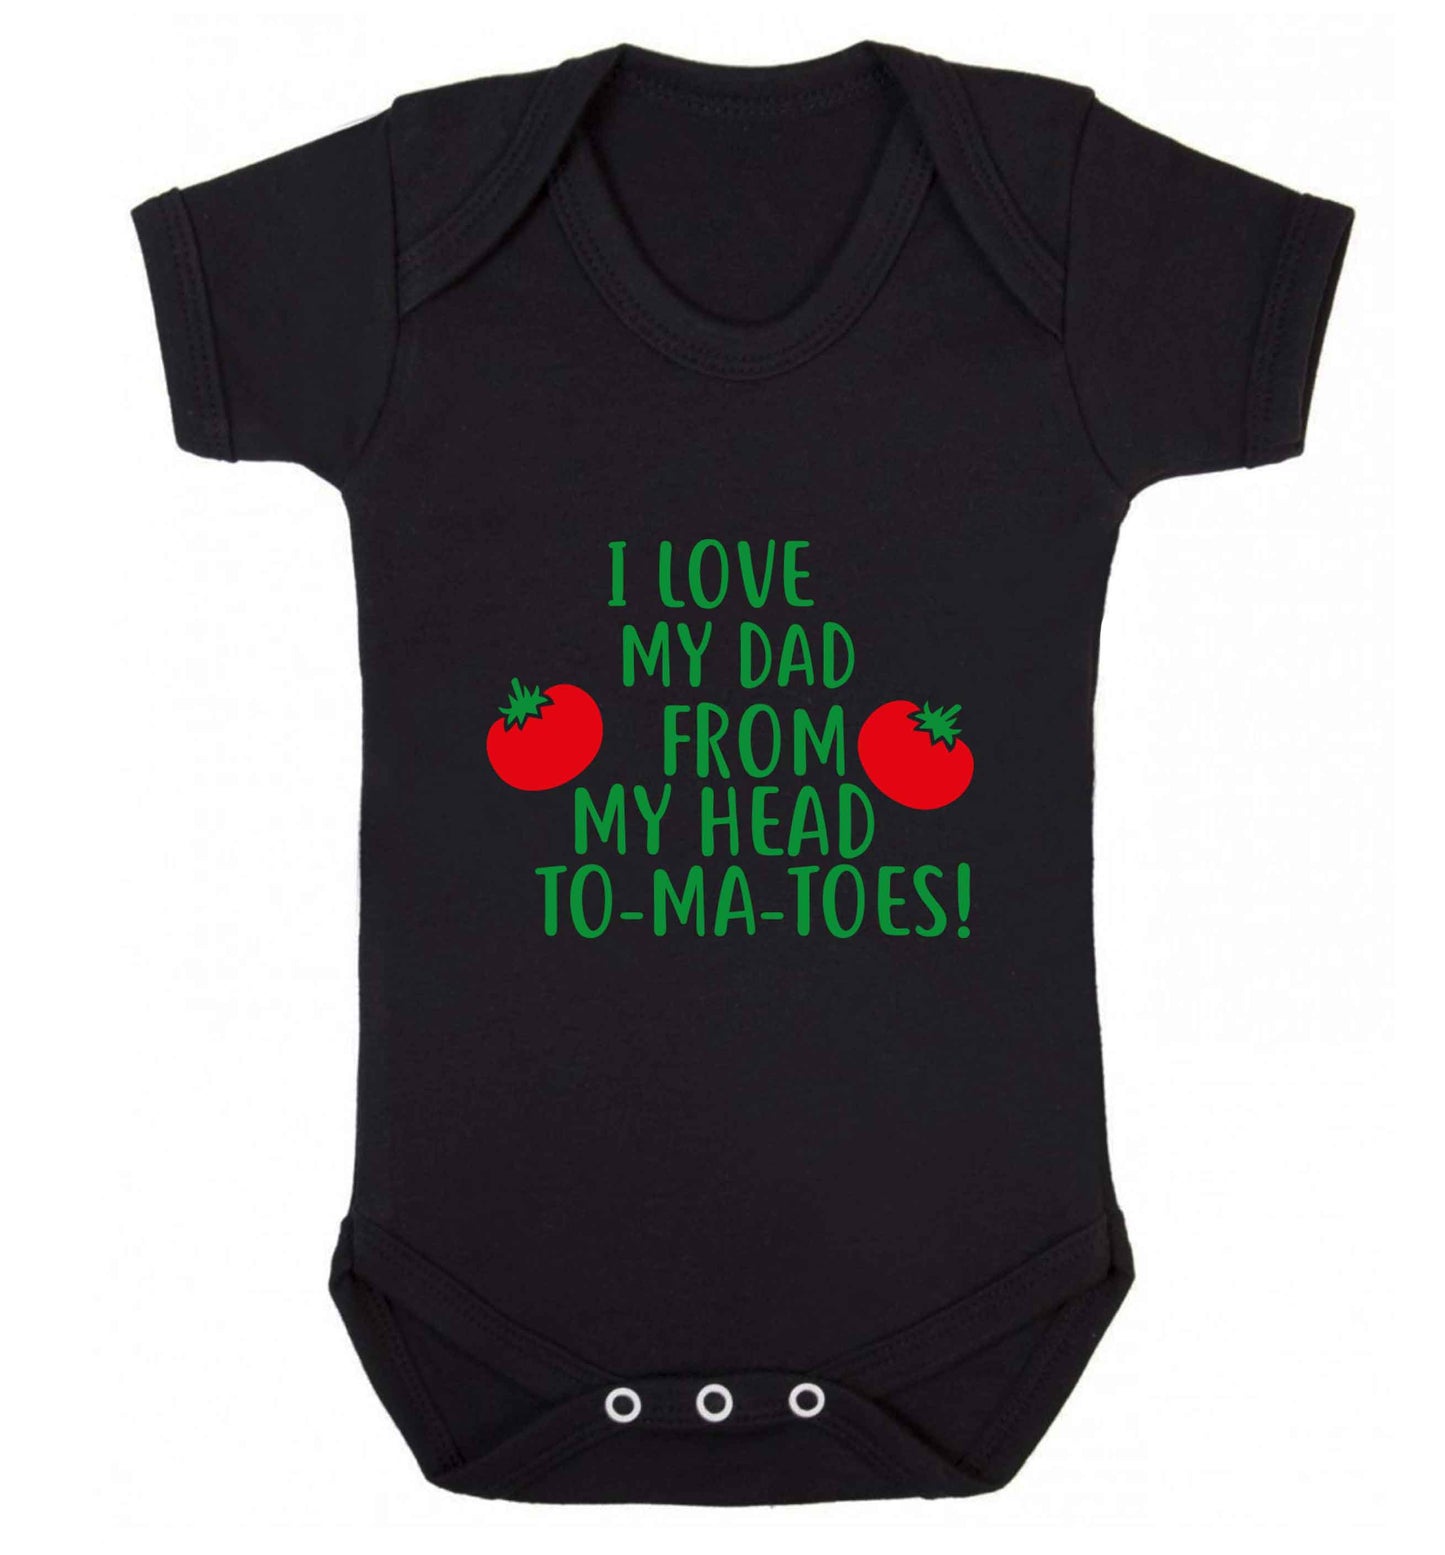 I love my dad from my head to-ma-toes baby vest black 18-24 months